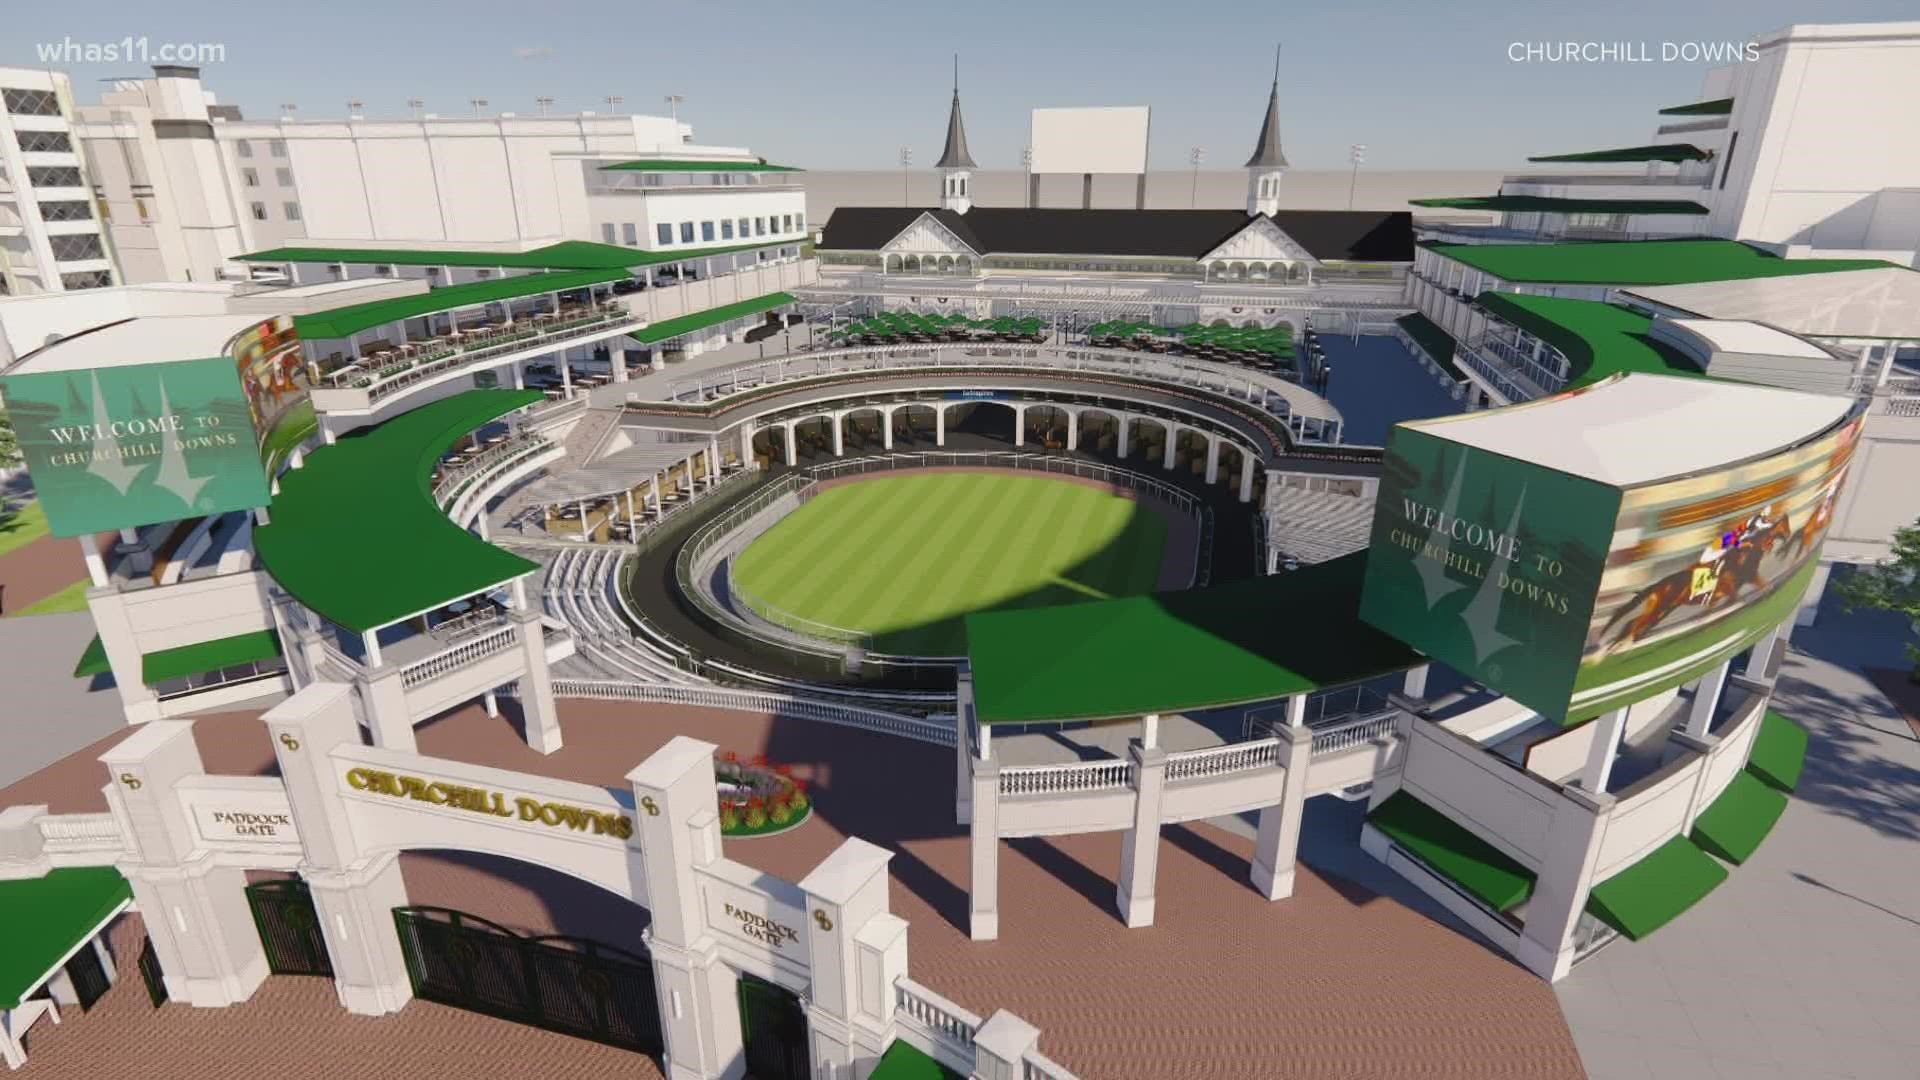 The multi-million dollar changes are expected to be complete by Kentucky Derby 150 in 2024.